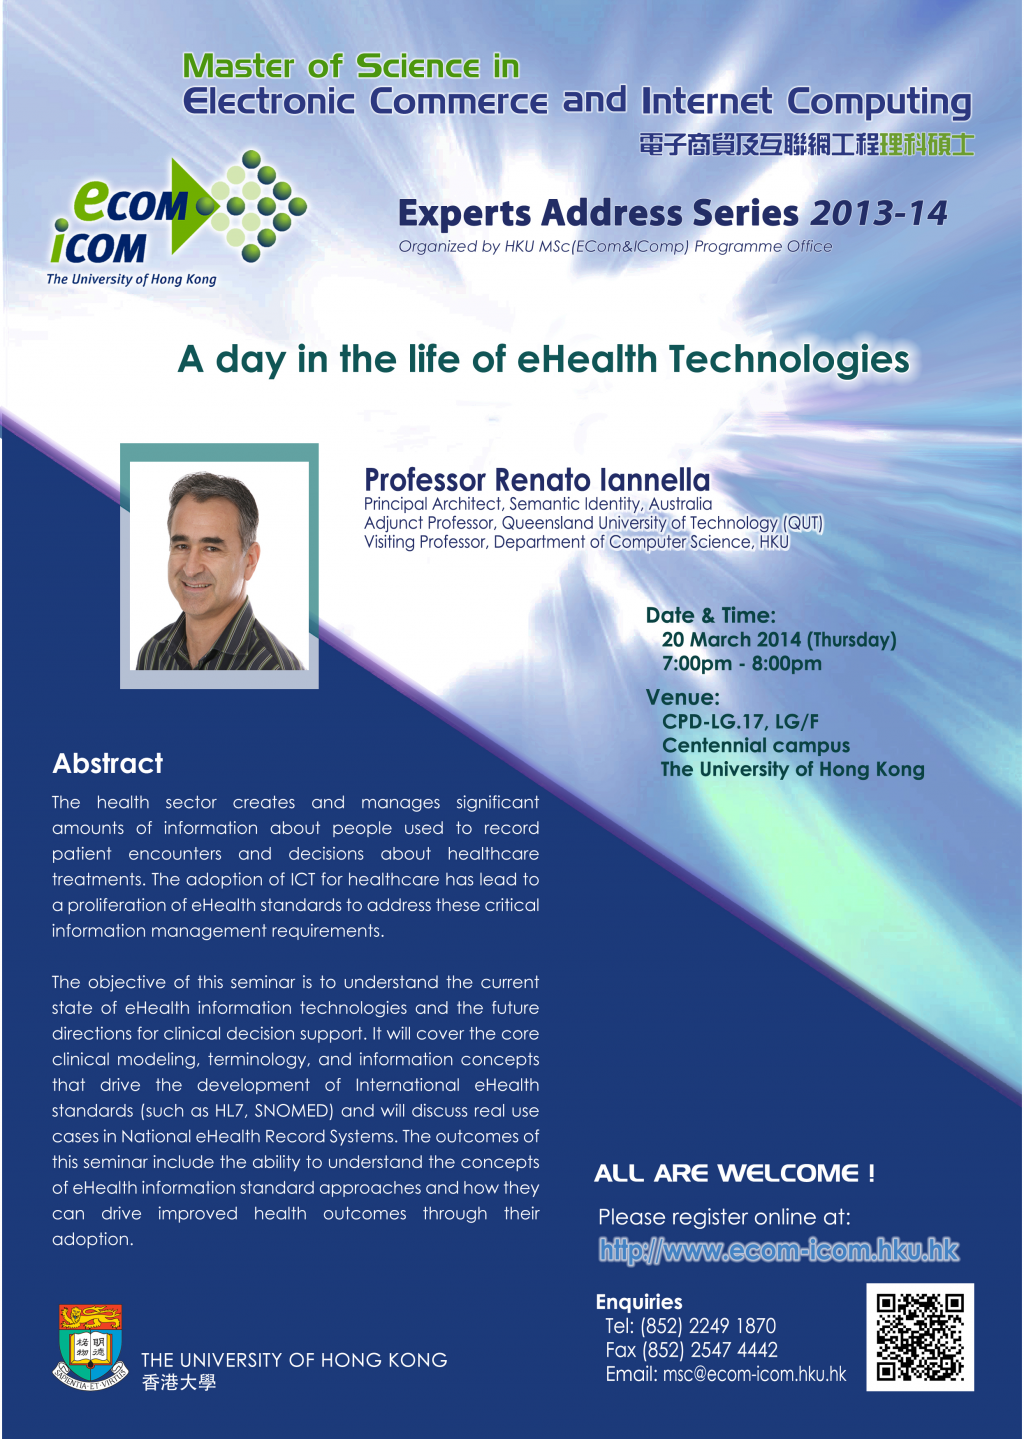 MSc(ECom&IComp) Experts Address: A day in the life of eHealth Technologies